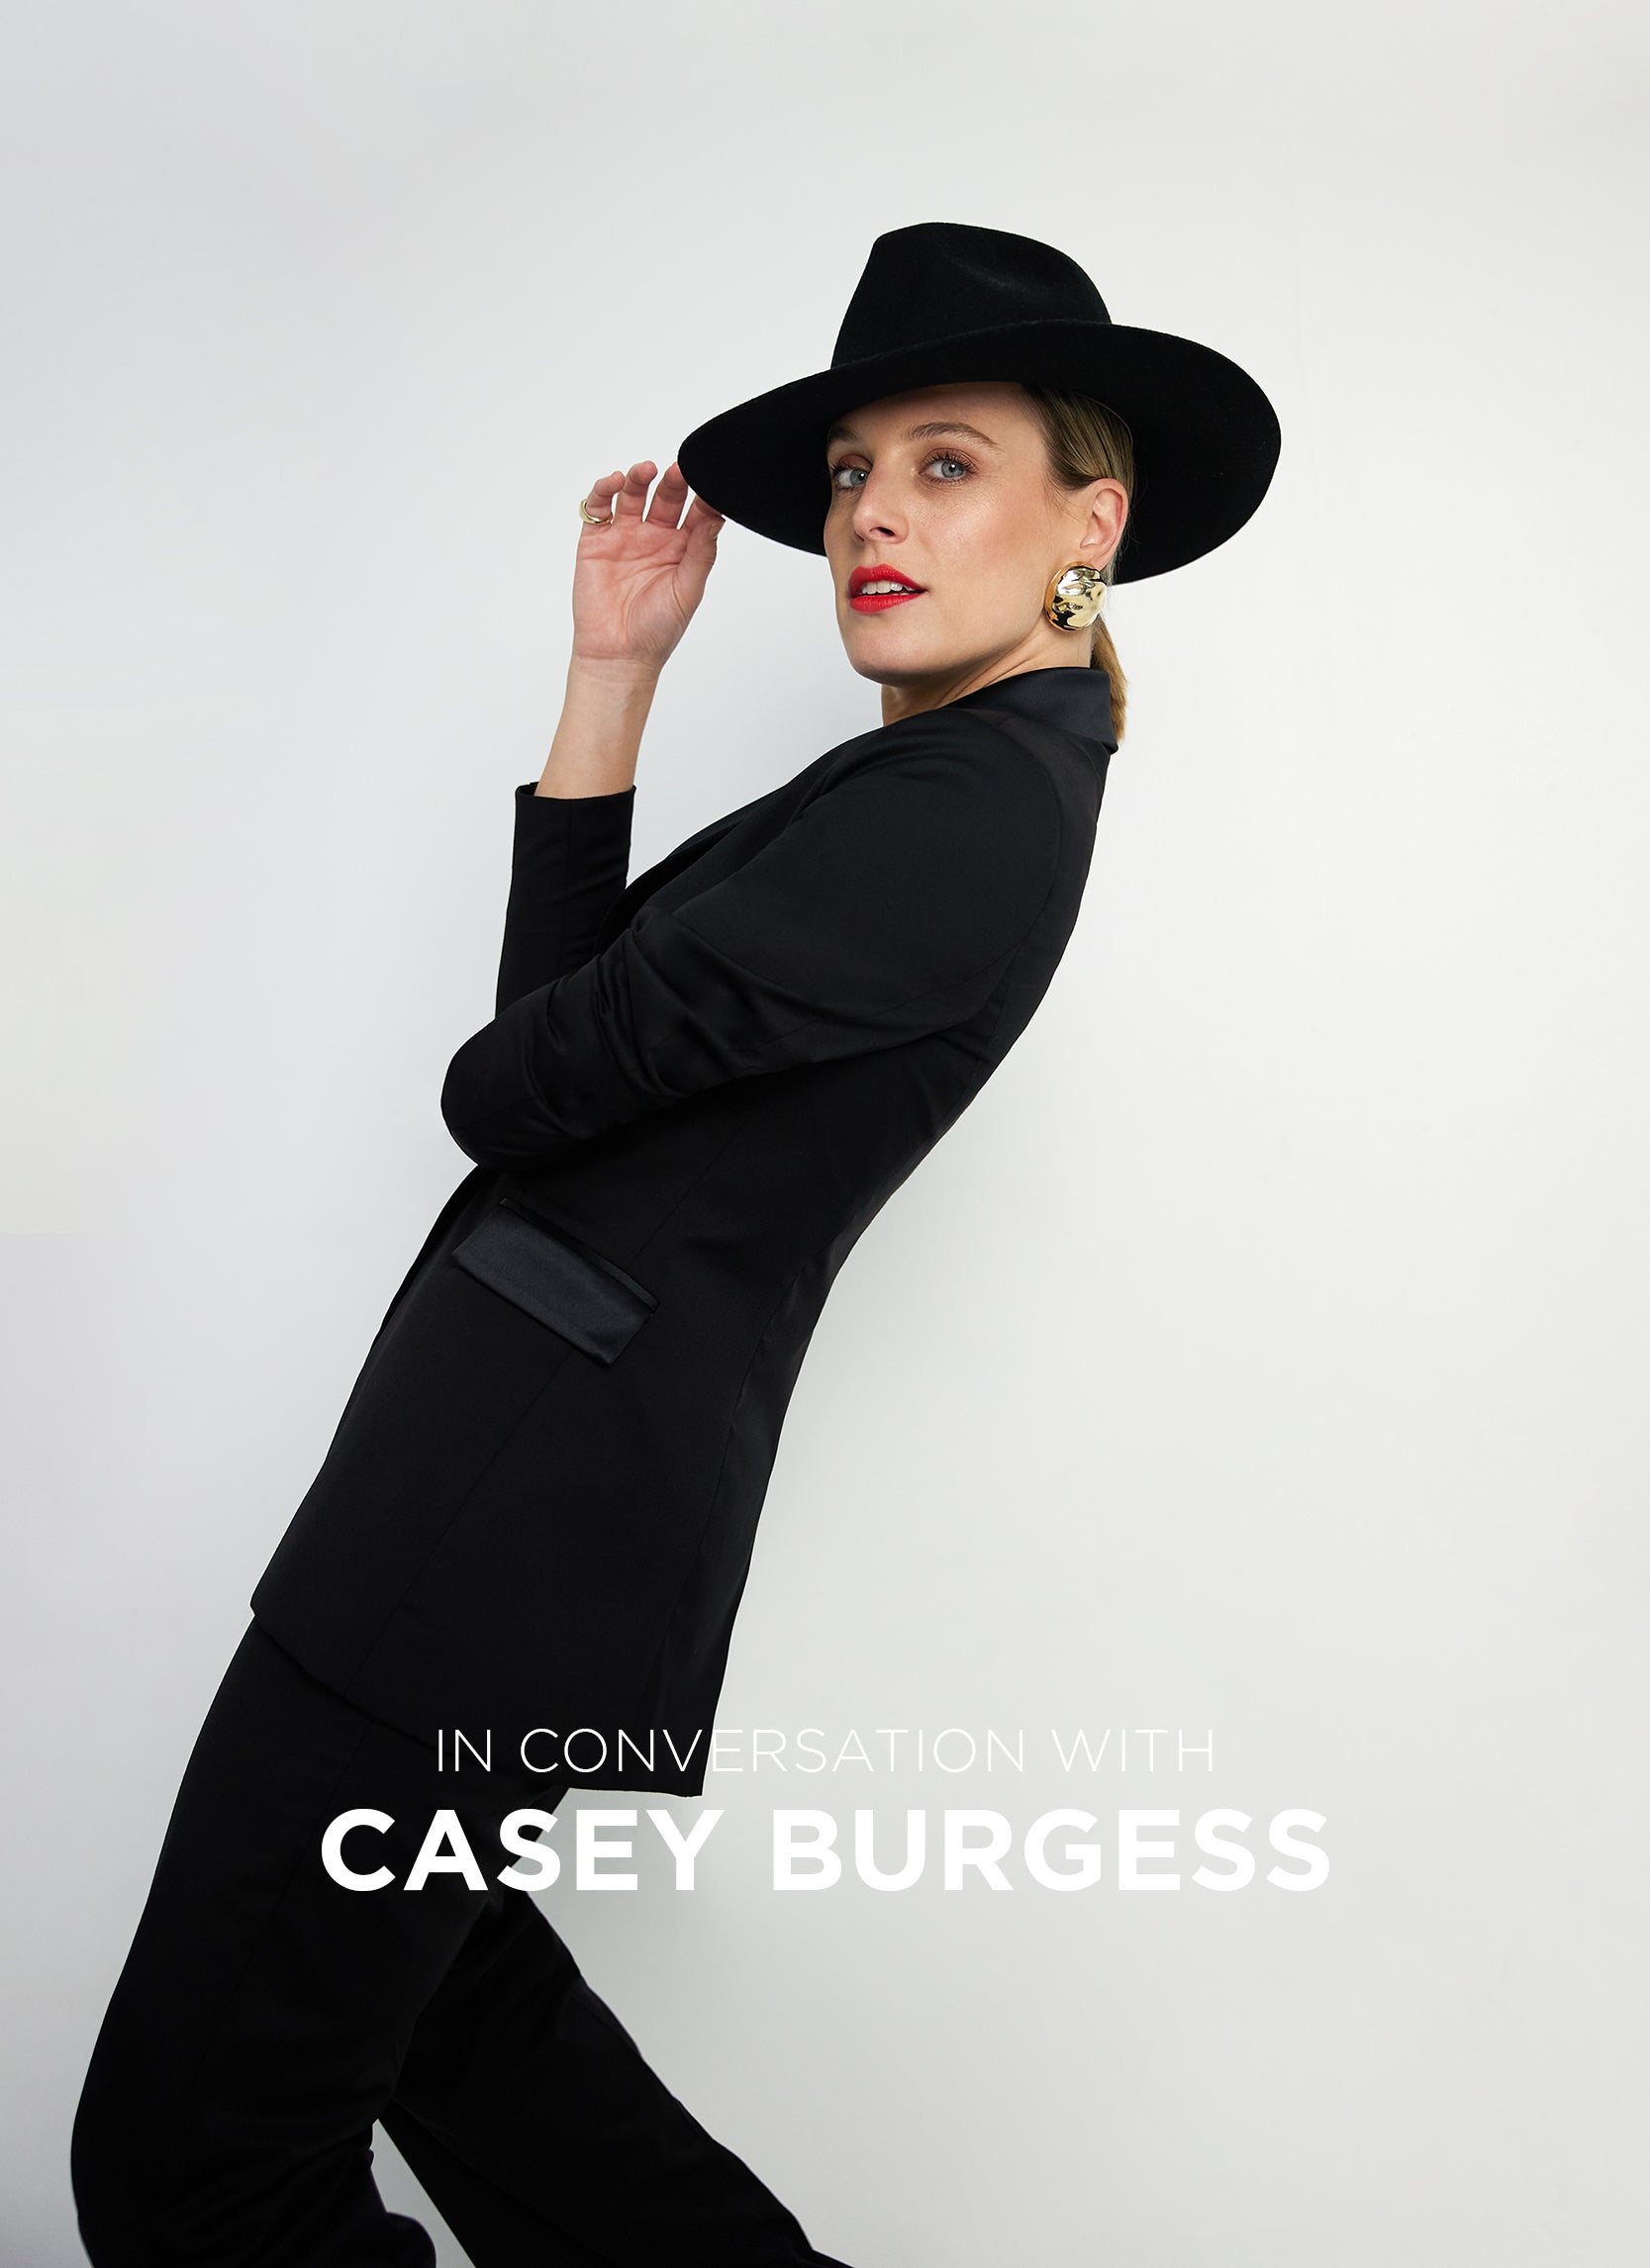 IN CONVERSATION WITH CASEY BURGESS